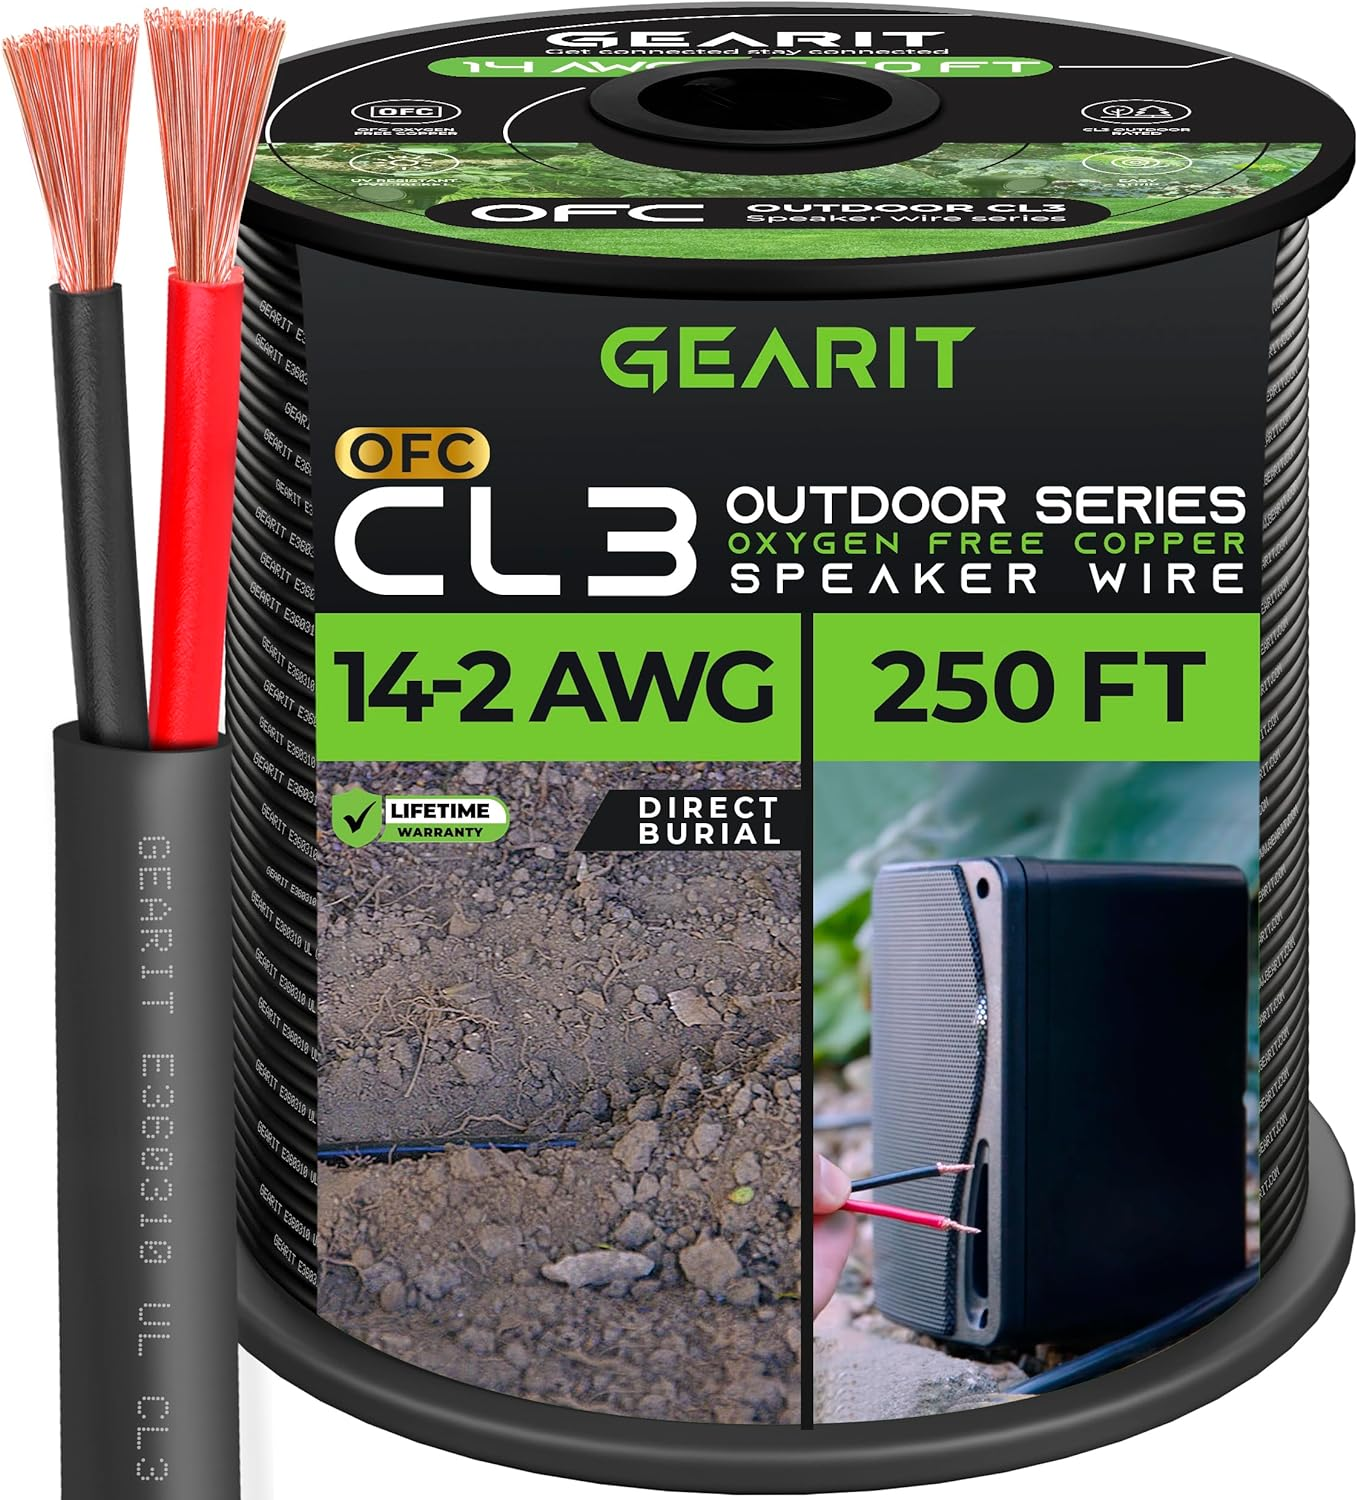 14/2 Speaker Wire (250 Feet) 14AWG Gauge – Outdoor Direct Burial in Ground/In Wall / CL3 CL2 Rated / 2 Conductors – OFC Oxygen-Free Copper, Black 250Ft